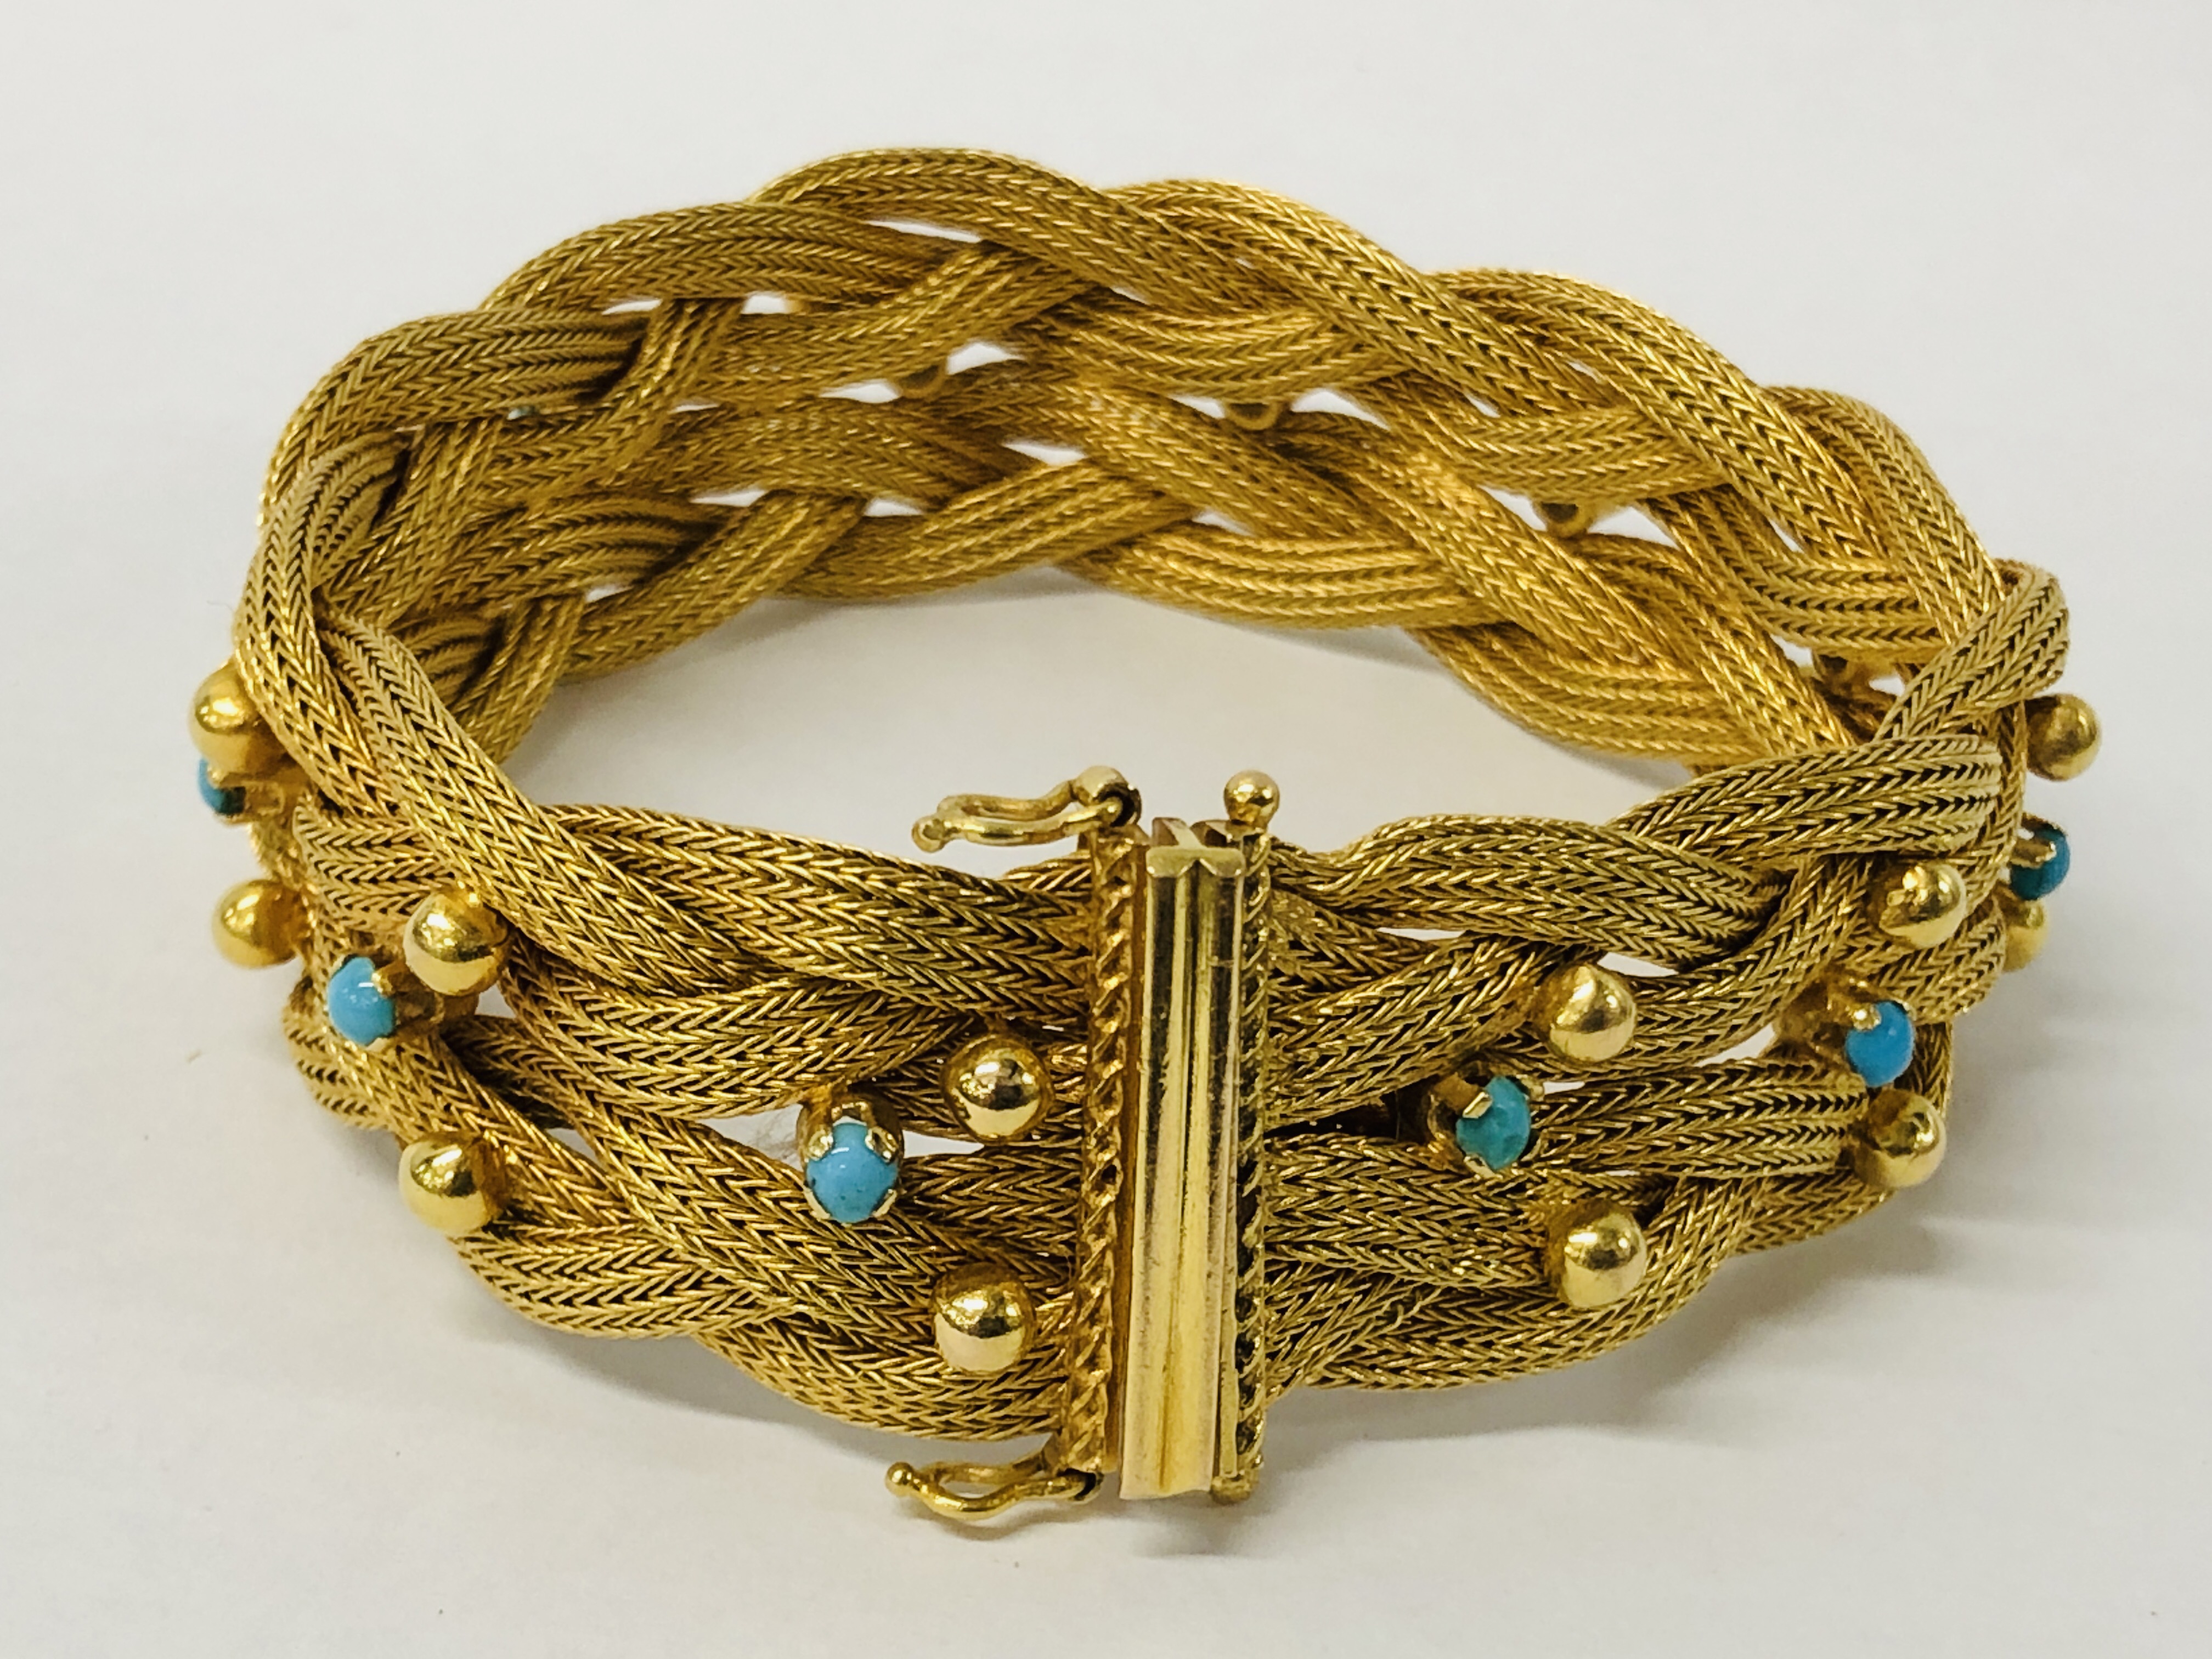 A ROPE TWIST BRACELET SET WITH TINY TURQUOISE STONES, THE CLASP MARKED 750. - Image 5 of 10